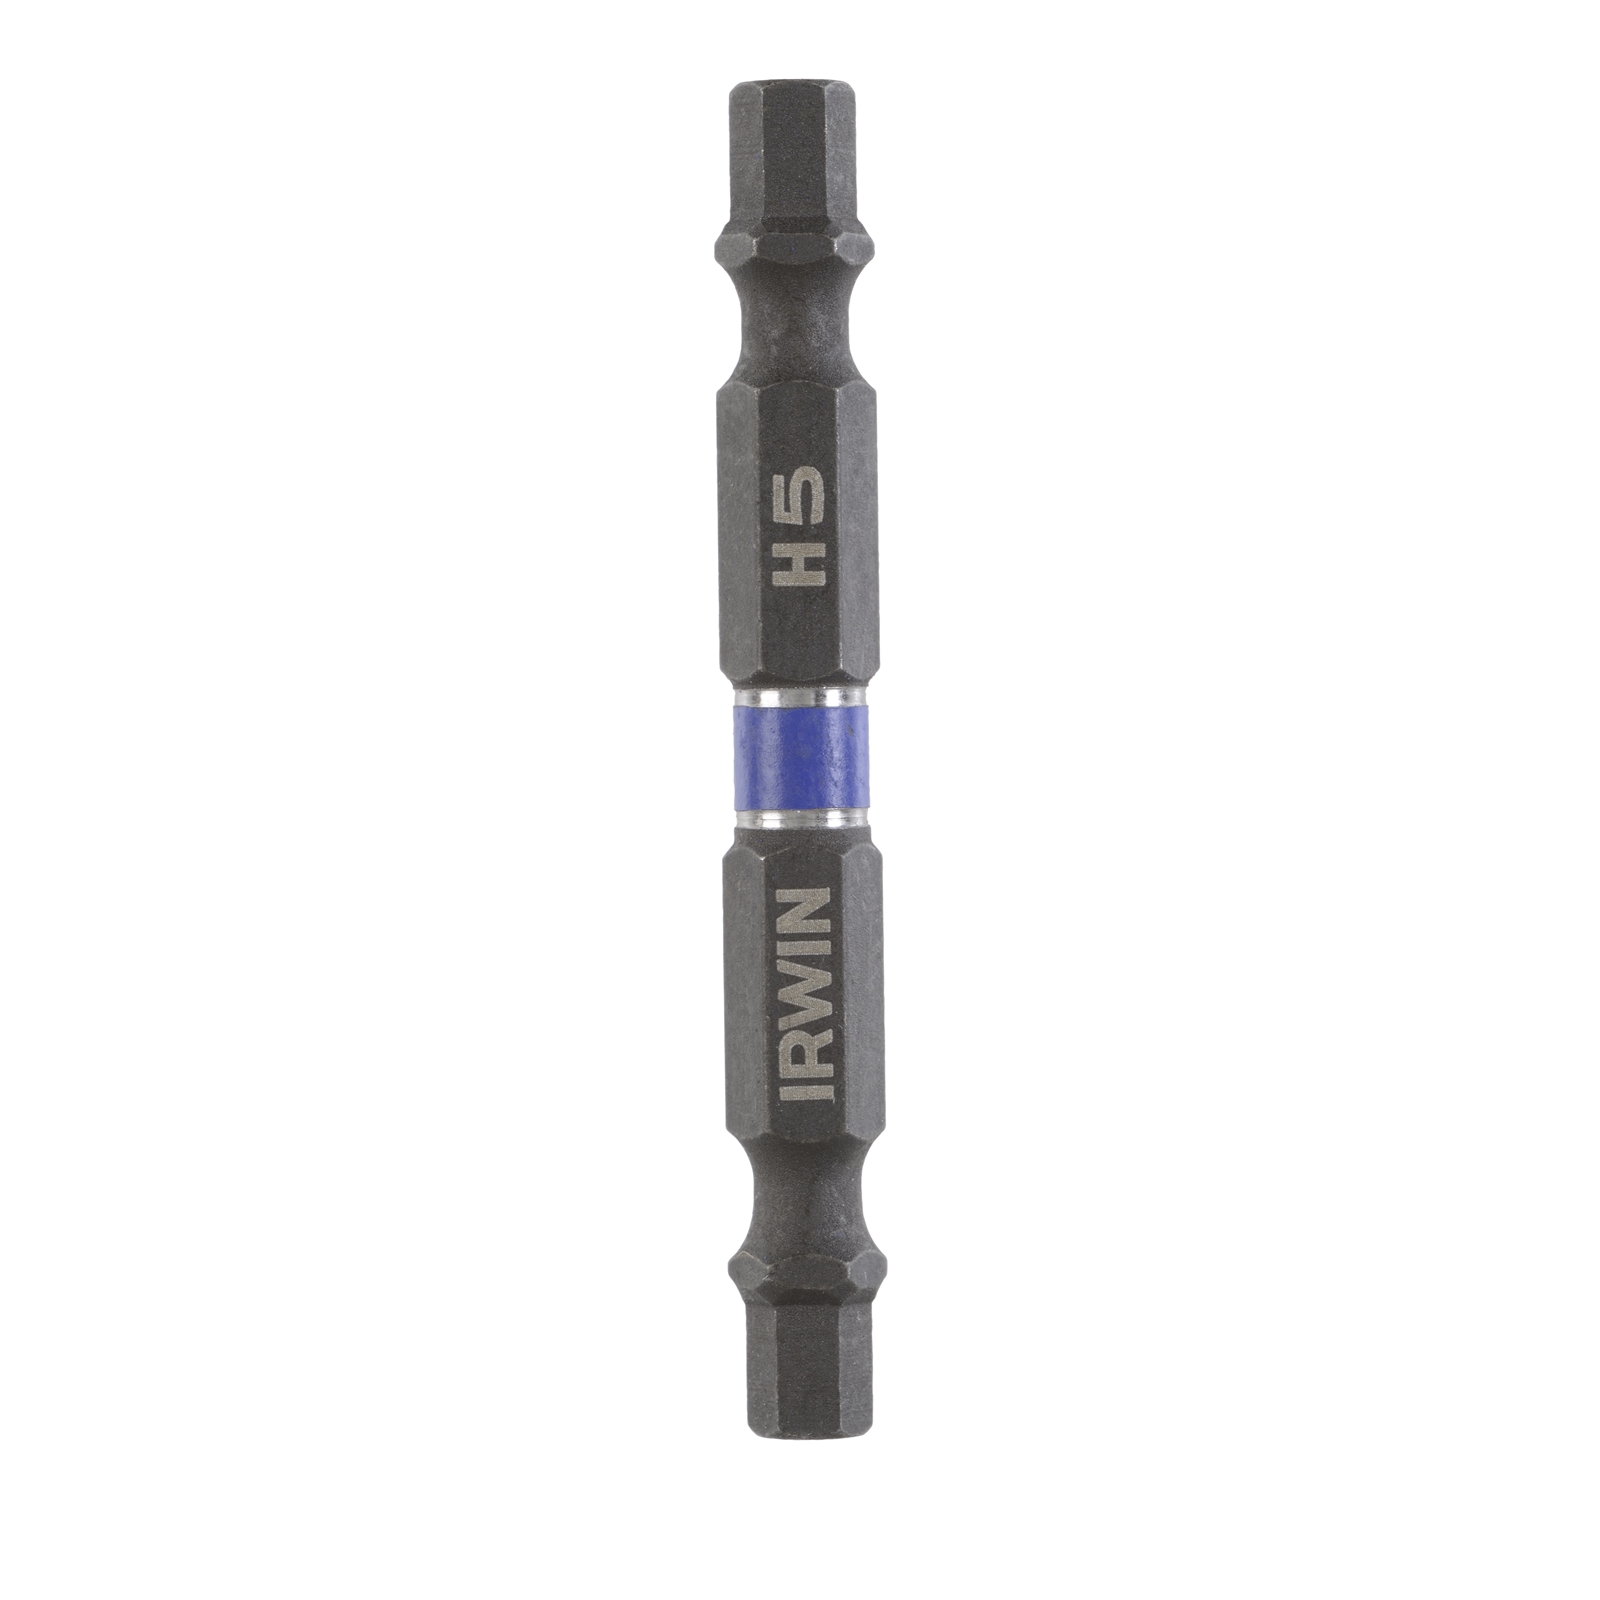 Irwin 5 x 60mm Hex Impact Double Ended Screwdriver Bit